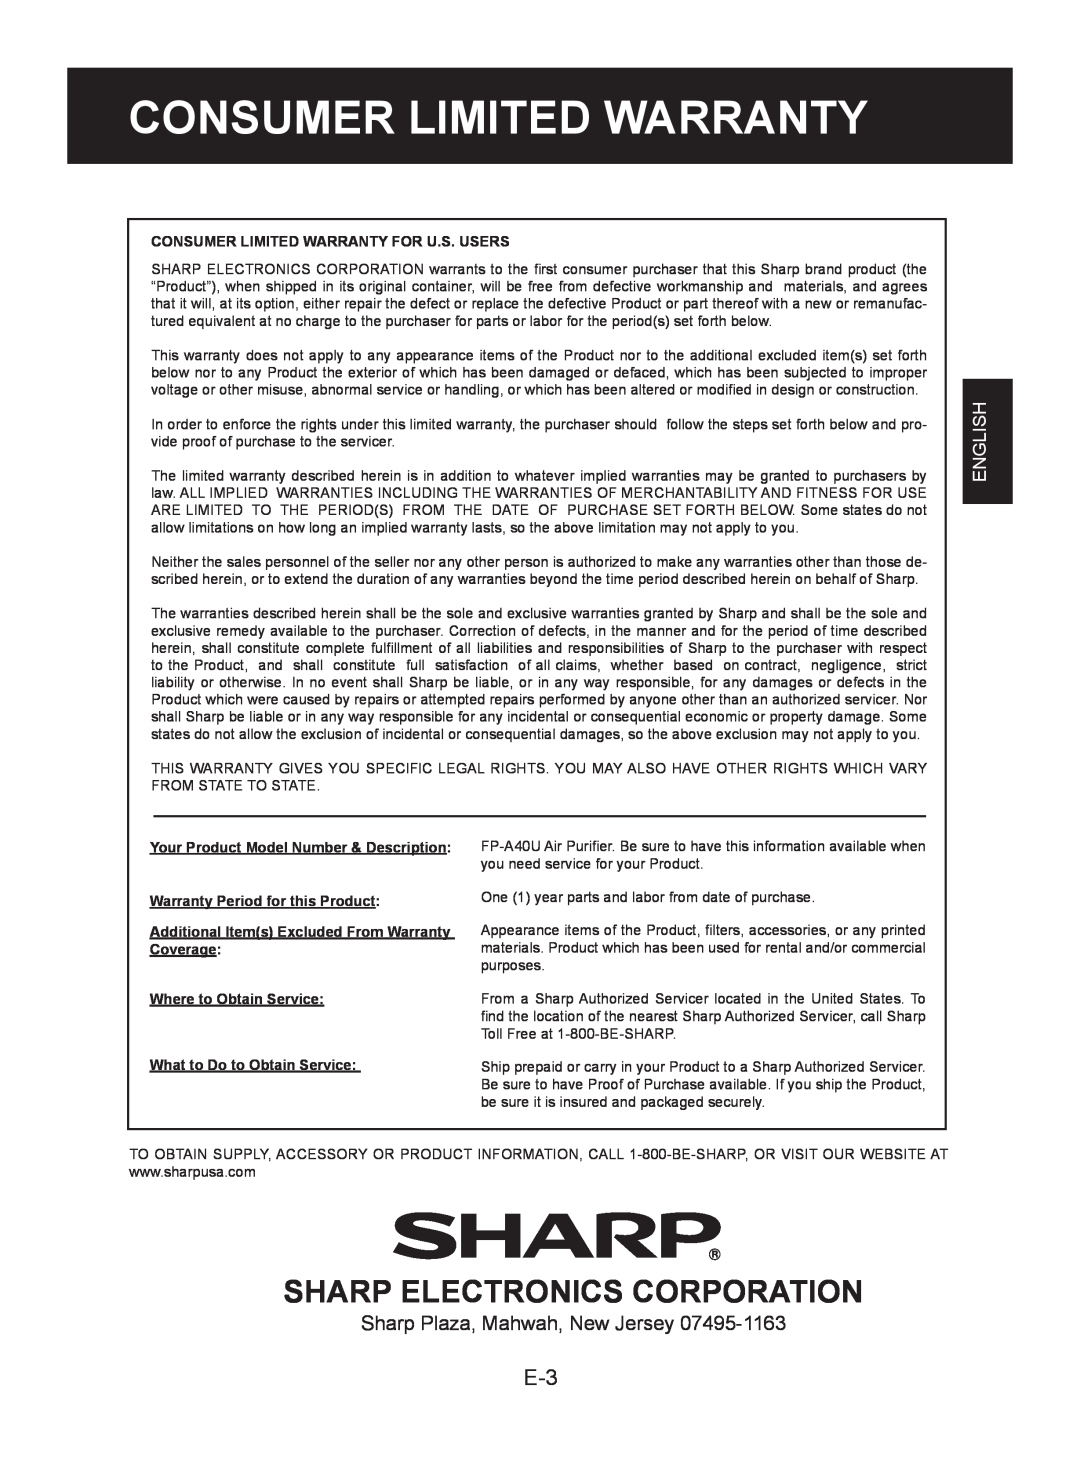 Sharp FP-A40UW, FP-A40C Sharp Electronics Corporation, English, Consumer Limited Warranty For U.S. Users 